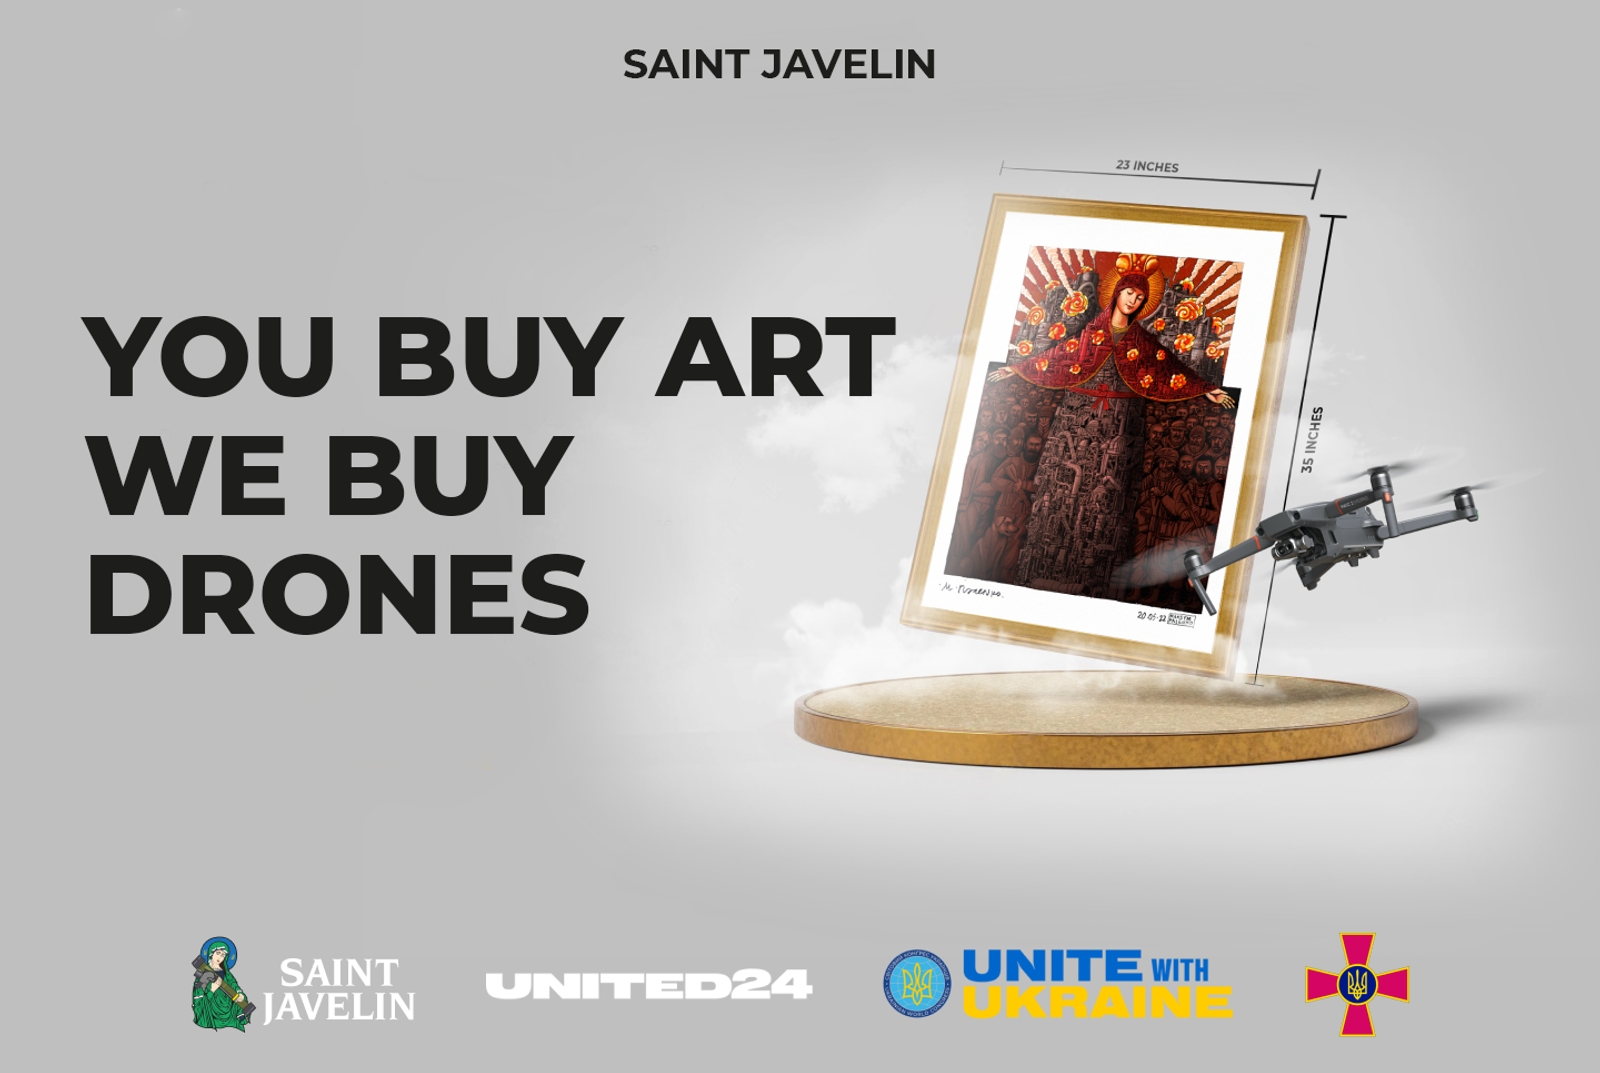 Saint Javelin is Supporting UNITED24 and Fundraising Drones for Ukraine